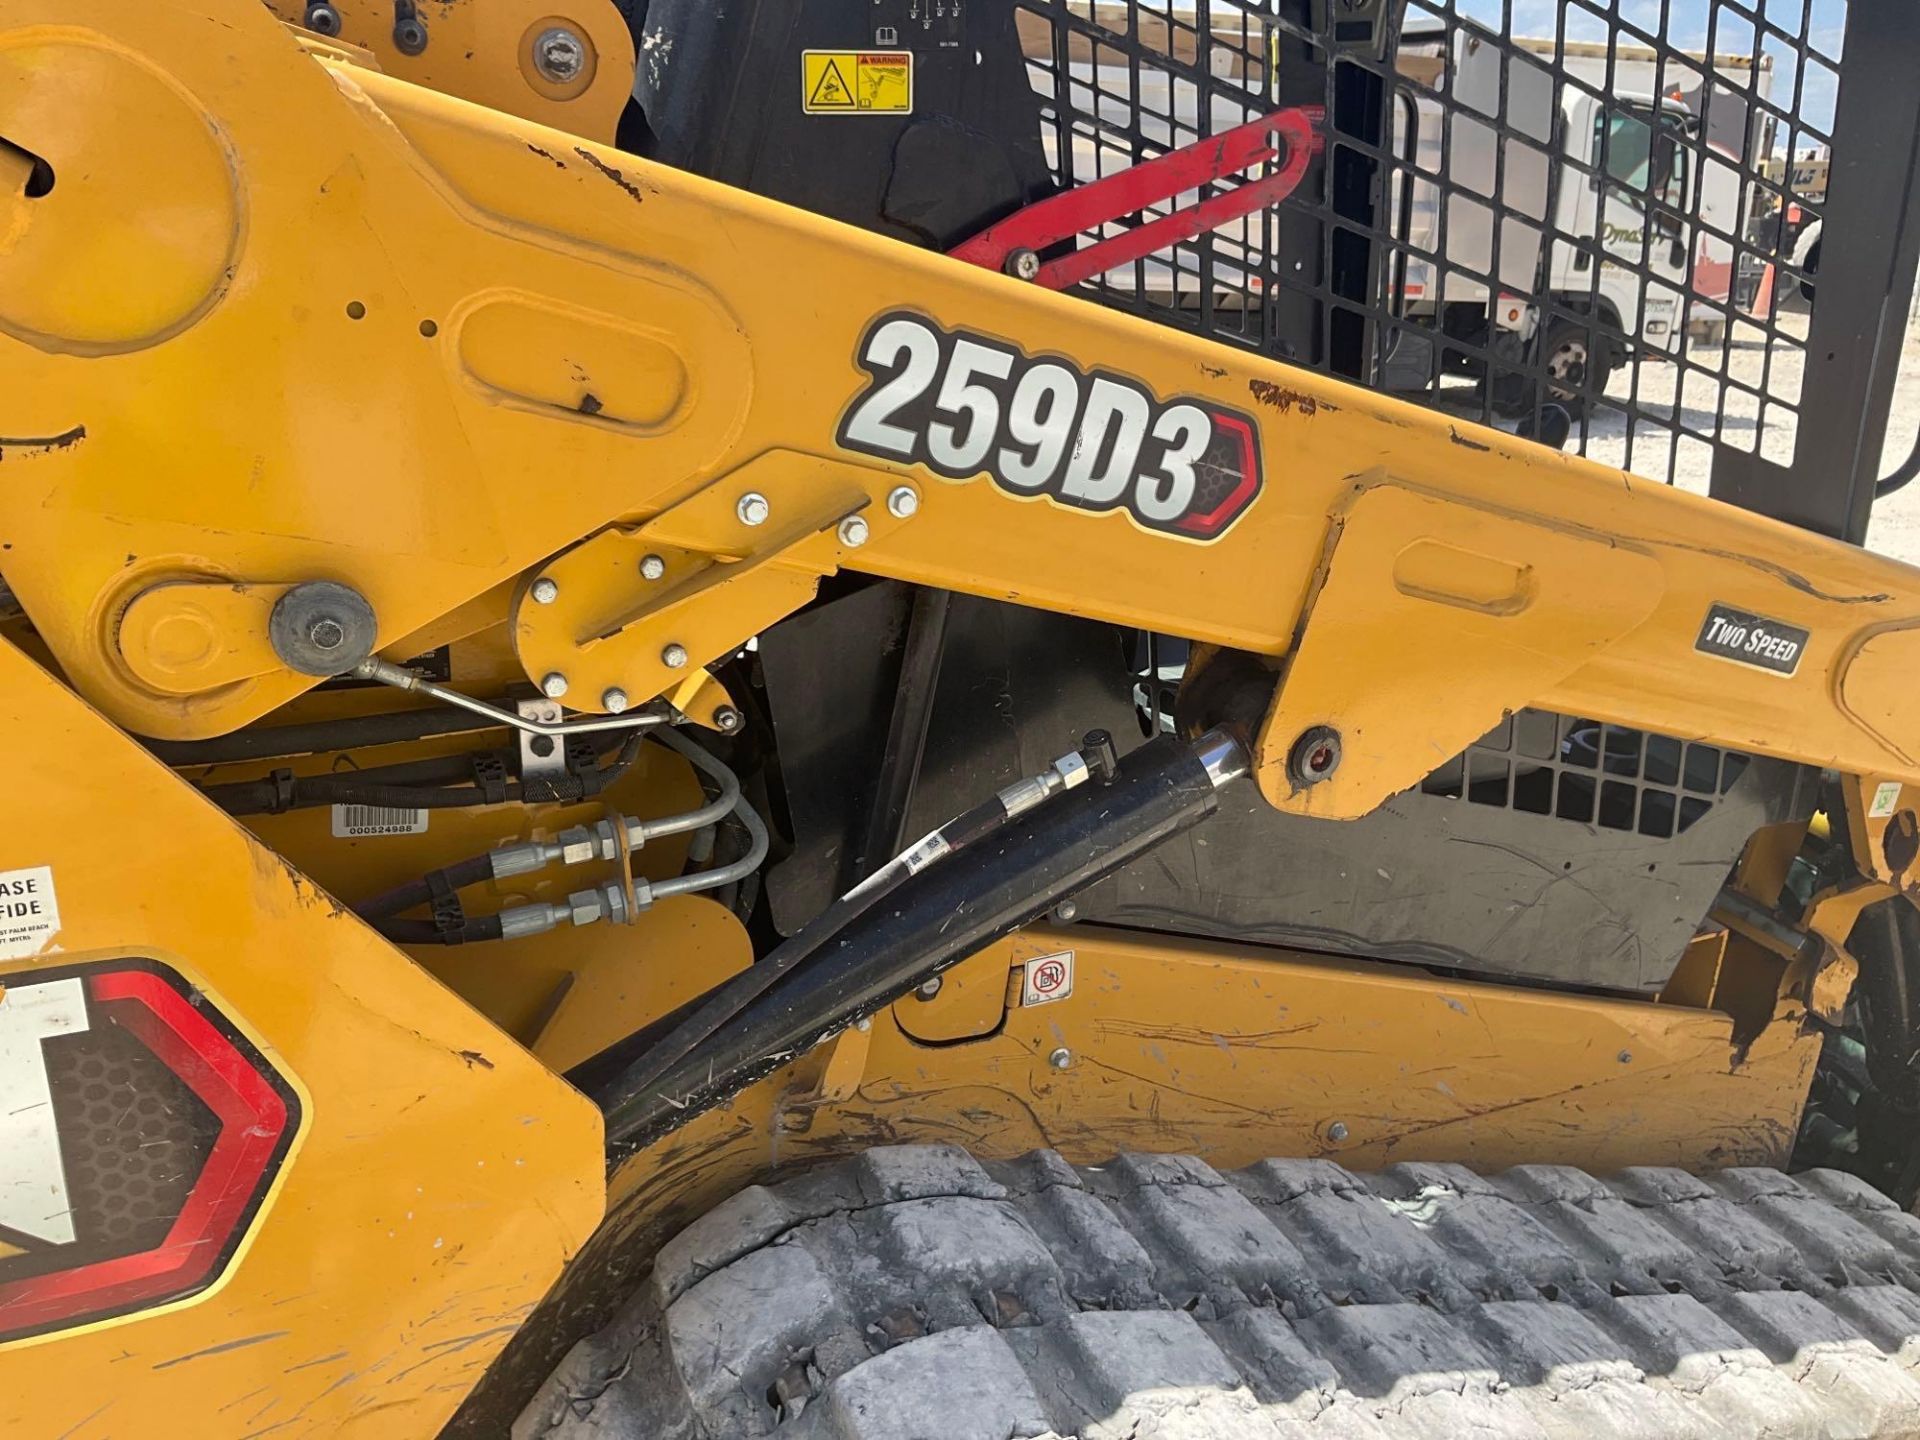 2020 Caterpillar 259D3 Two-Speed Skid Steer Track Loader - Image 14 of 23